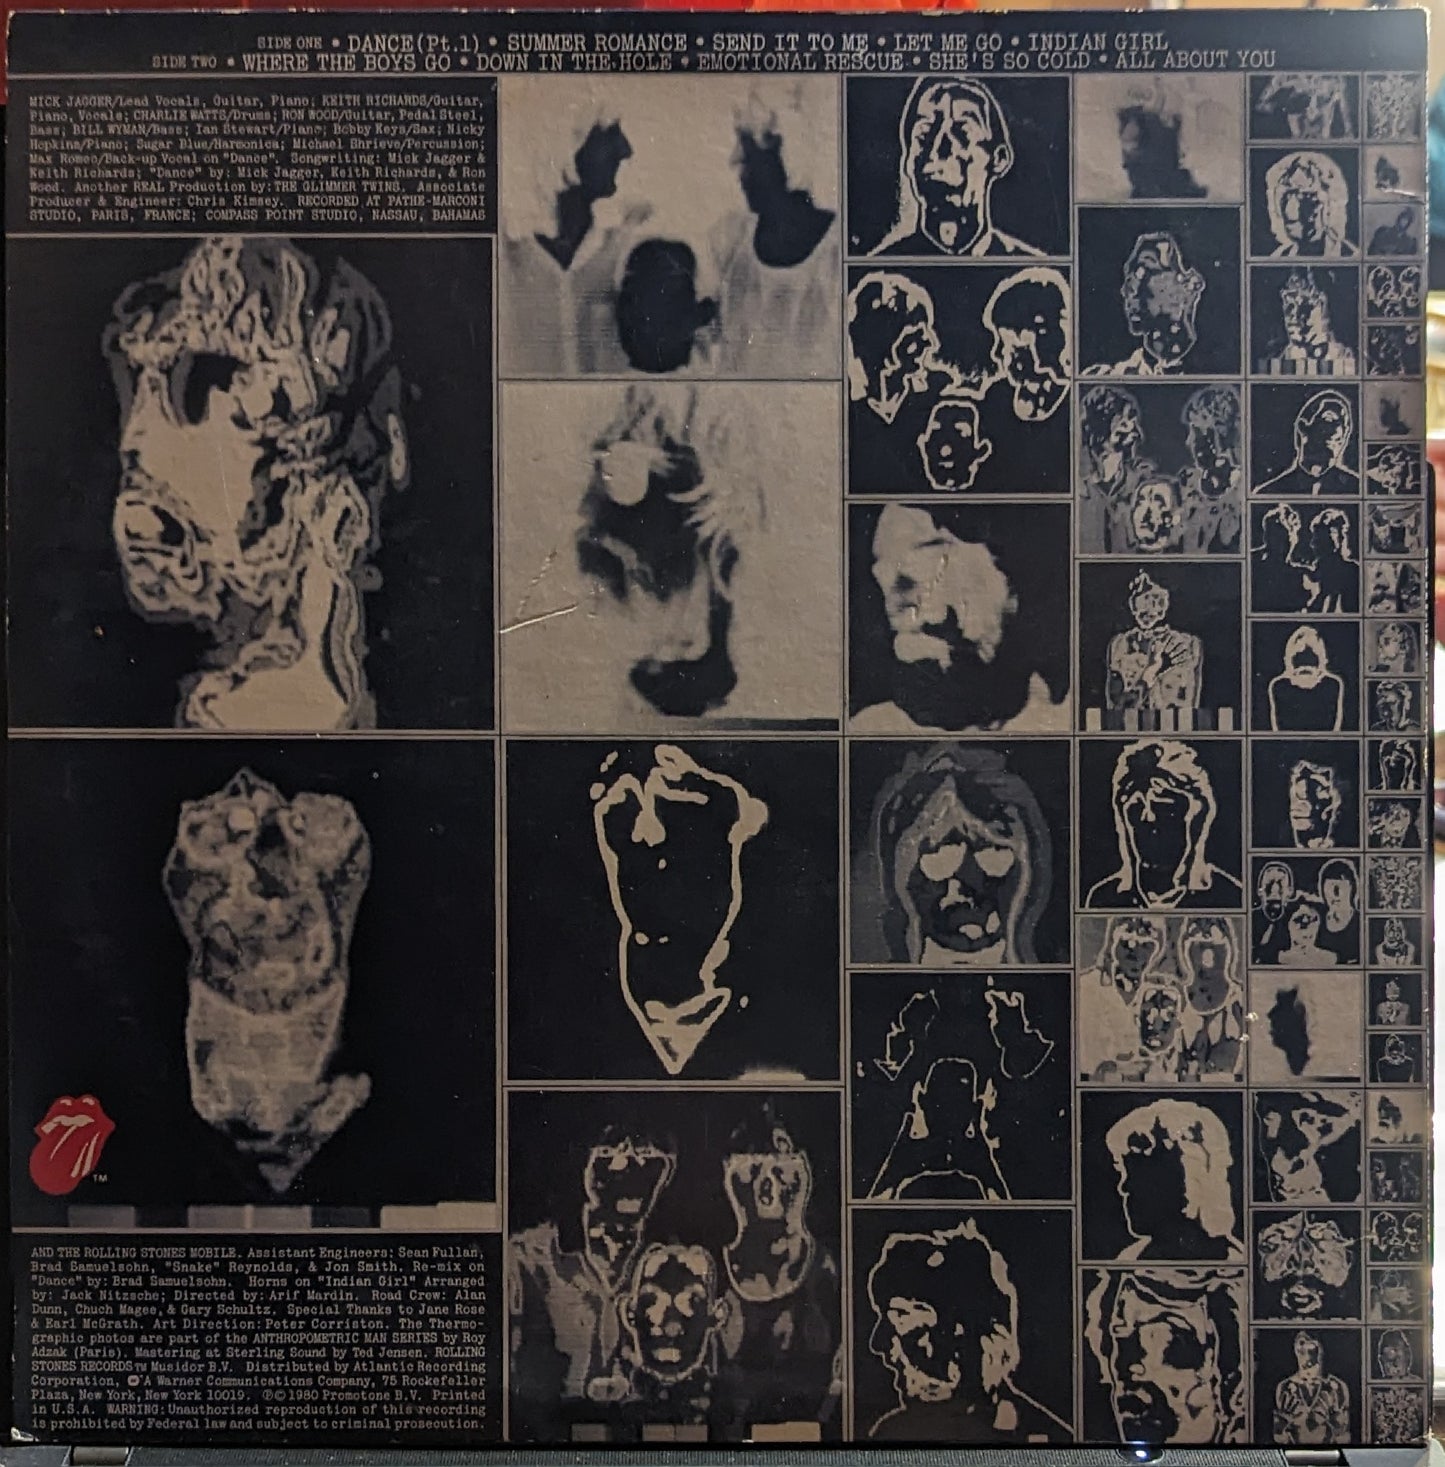 The Rolling Stones Emotional Rescue *SPECIALTY* LP Near Mint (NM or M-) Near Mint (NM or M-)